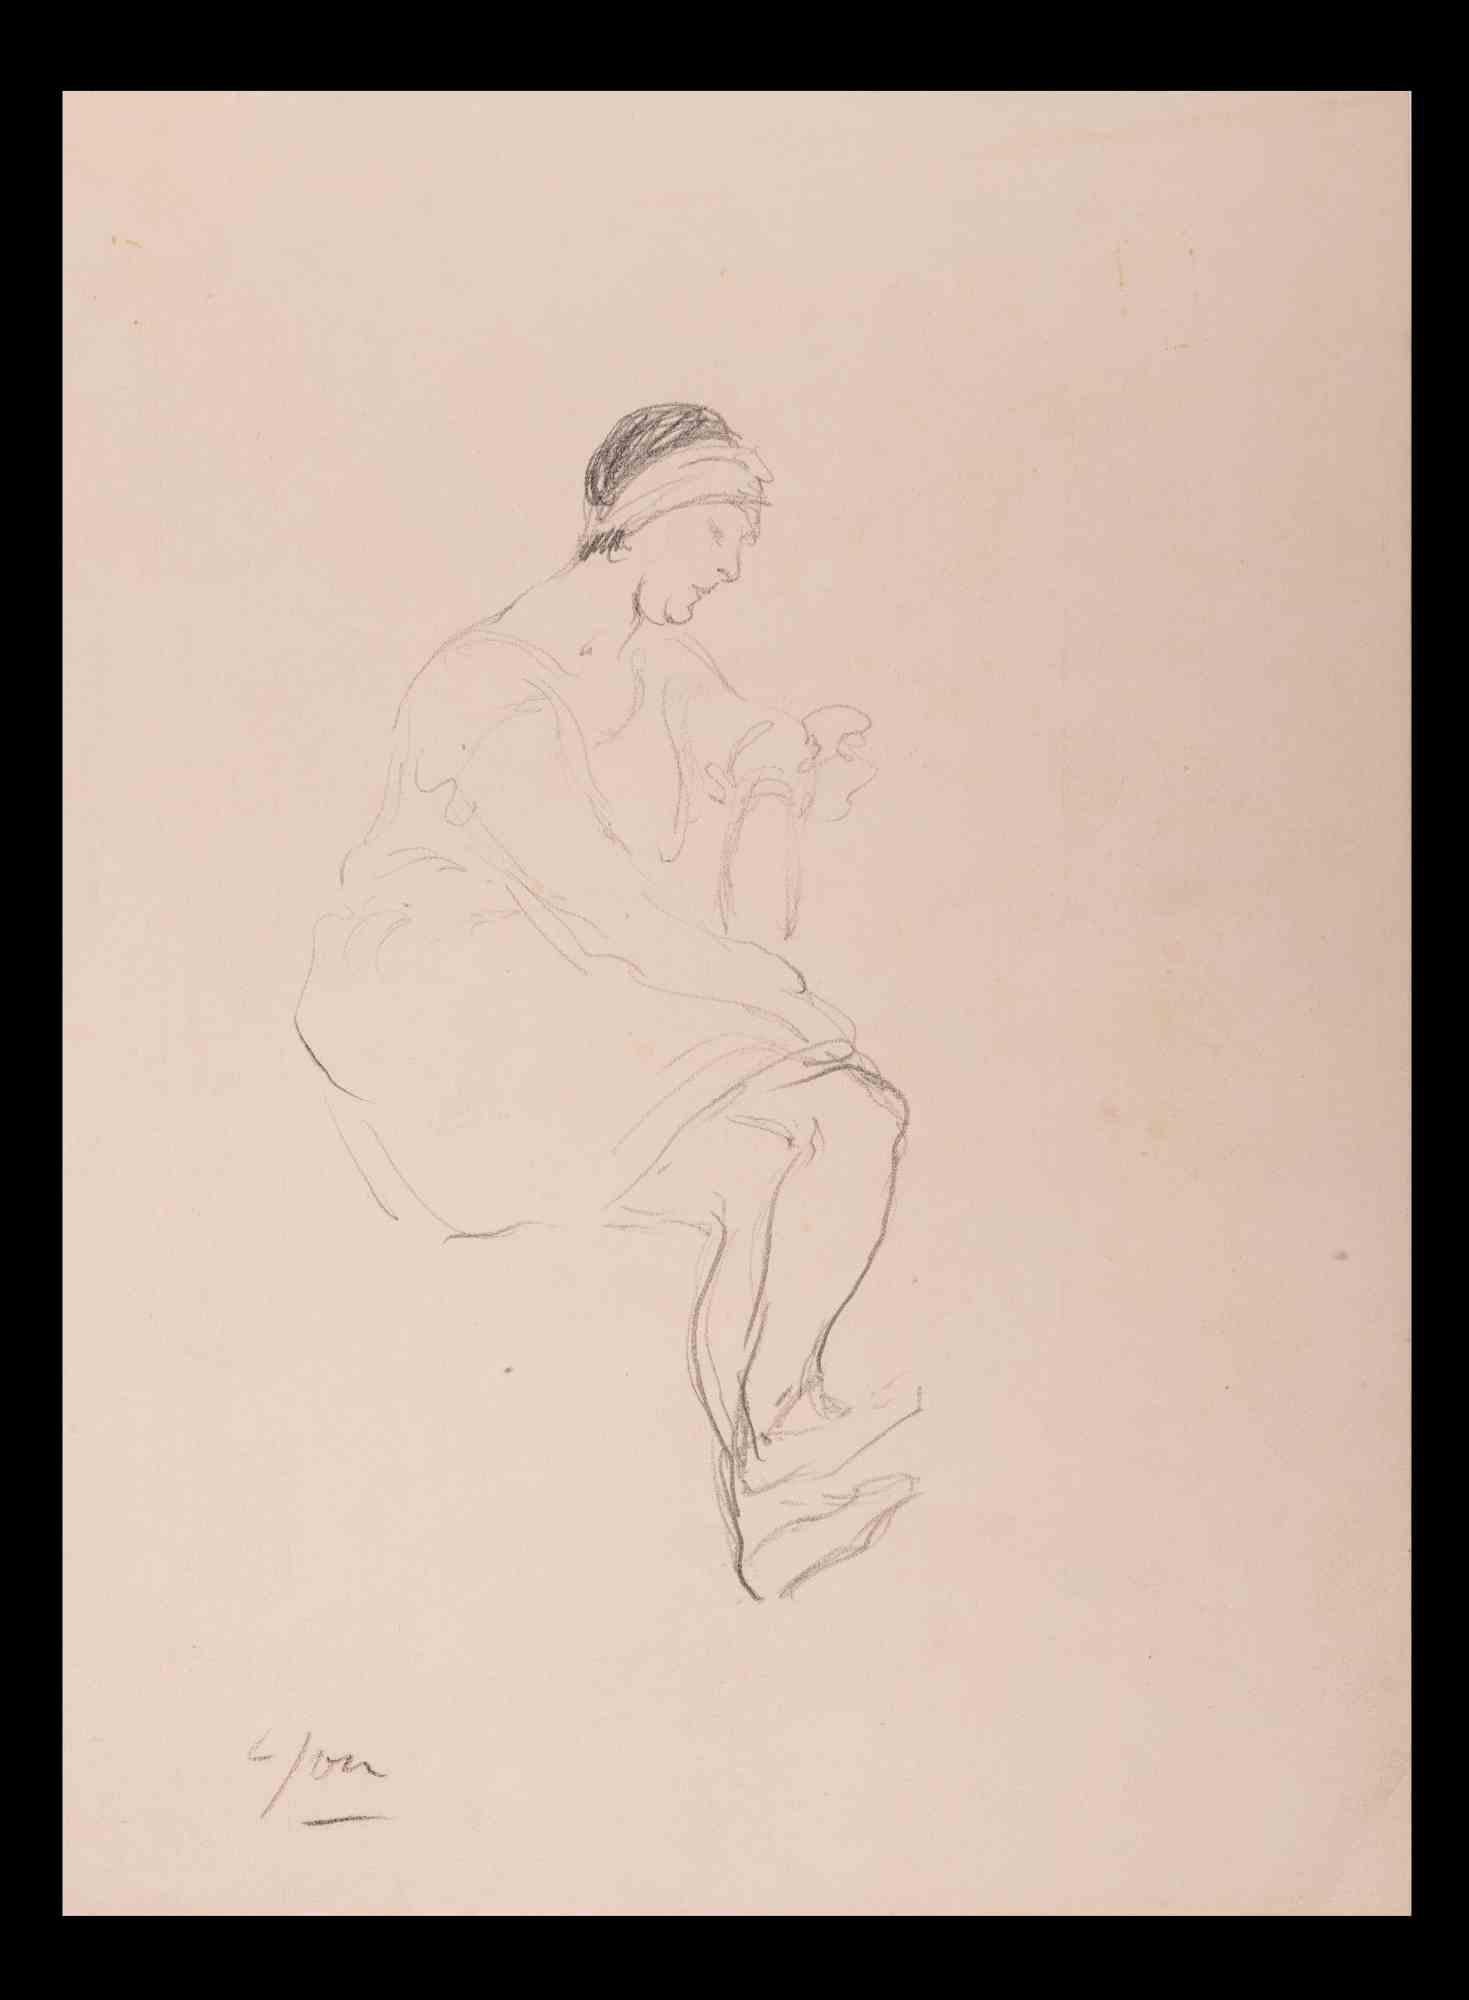 Seated Woman is an Original Drawing in Pencil realized by Louis Jou (1882-1968).

Good conditions.

Hand-signed.

The Artwork is depicted through strong strokes in a well-balanced composition.

 

 

 

 

 